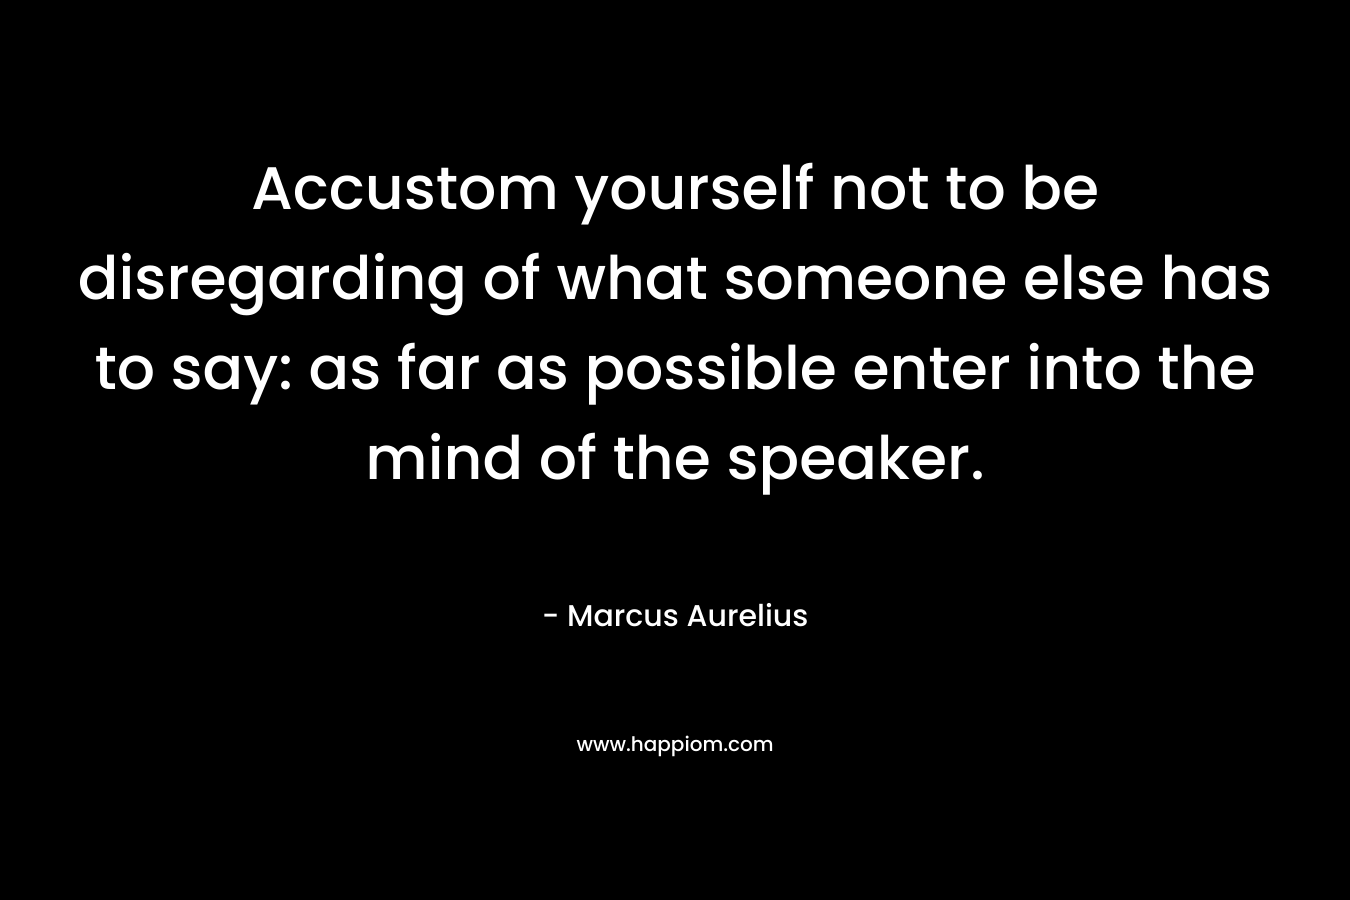 Accustom yourself not to be disregarding of what someone else has to say: as far as possible enter into the mind of the speaker. – Marcus Aurelius